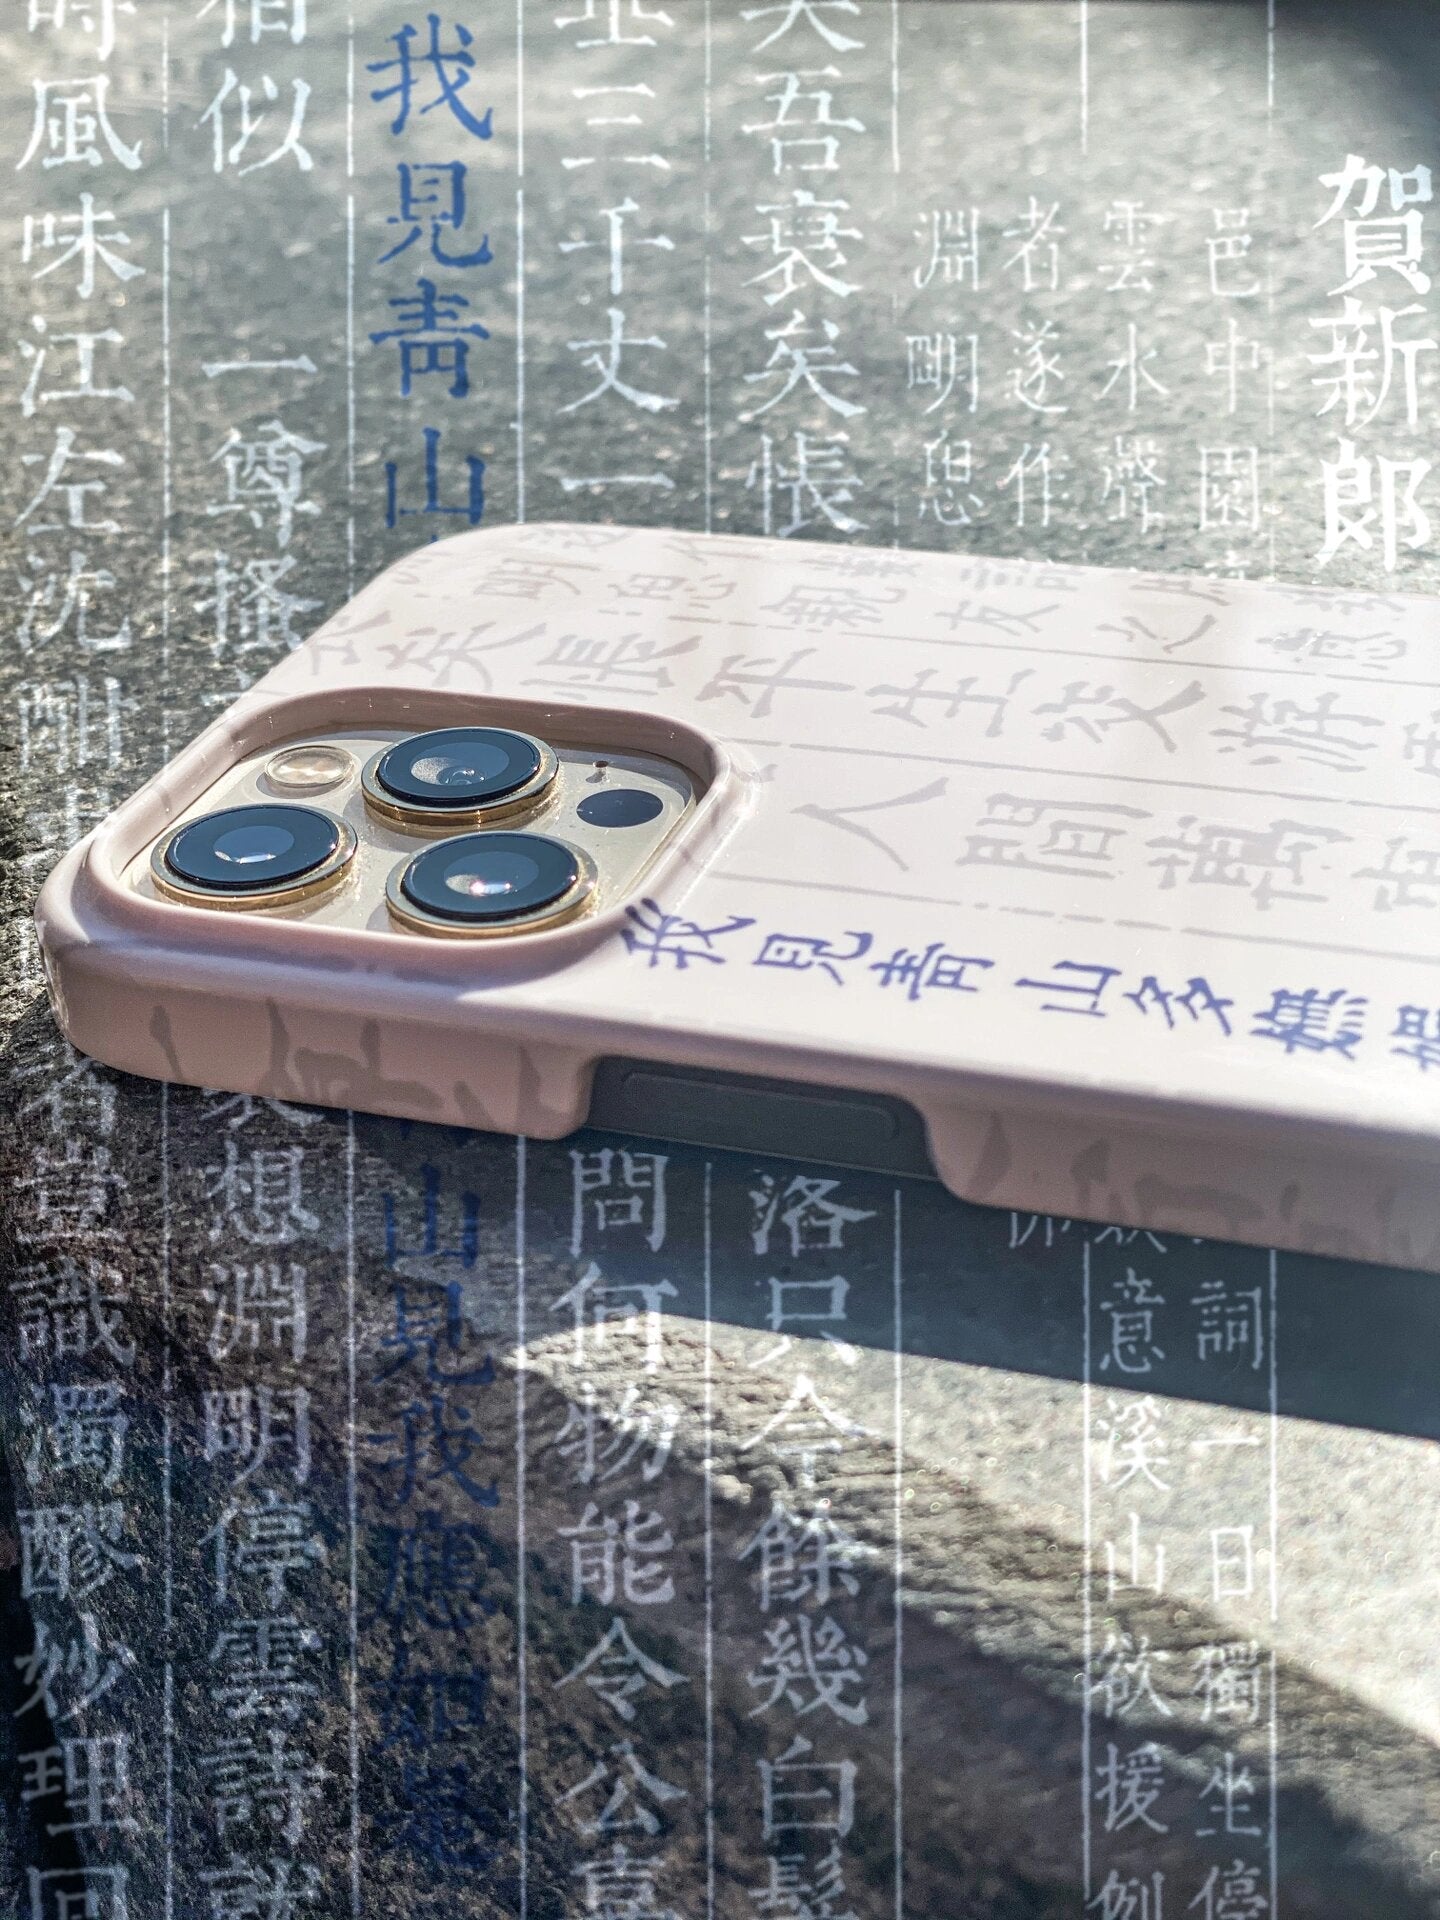 Chinese Traditional Scripture Calligraphy Phone Case 2.0